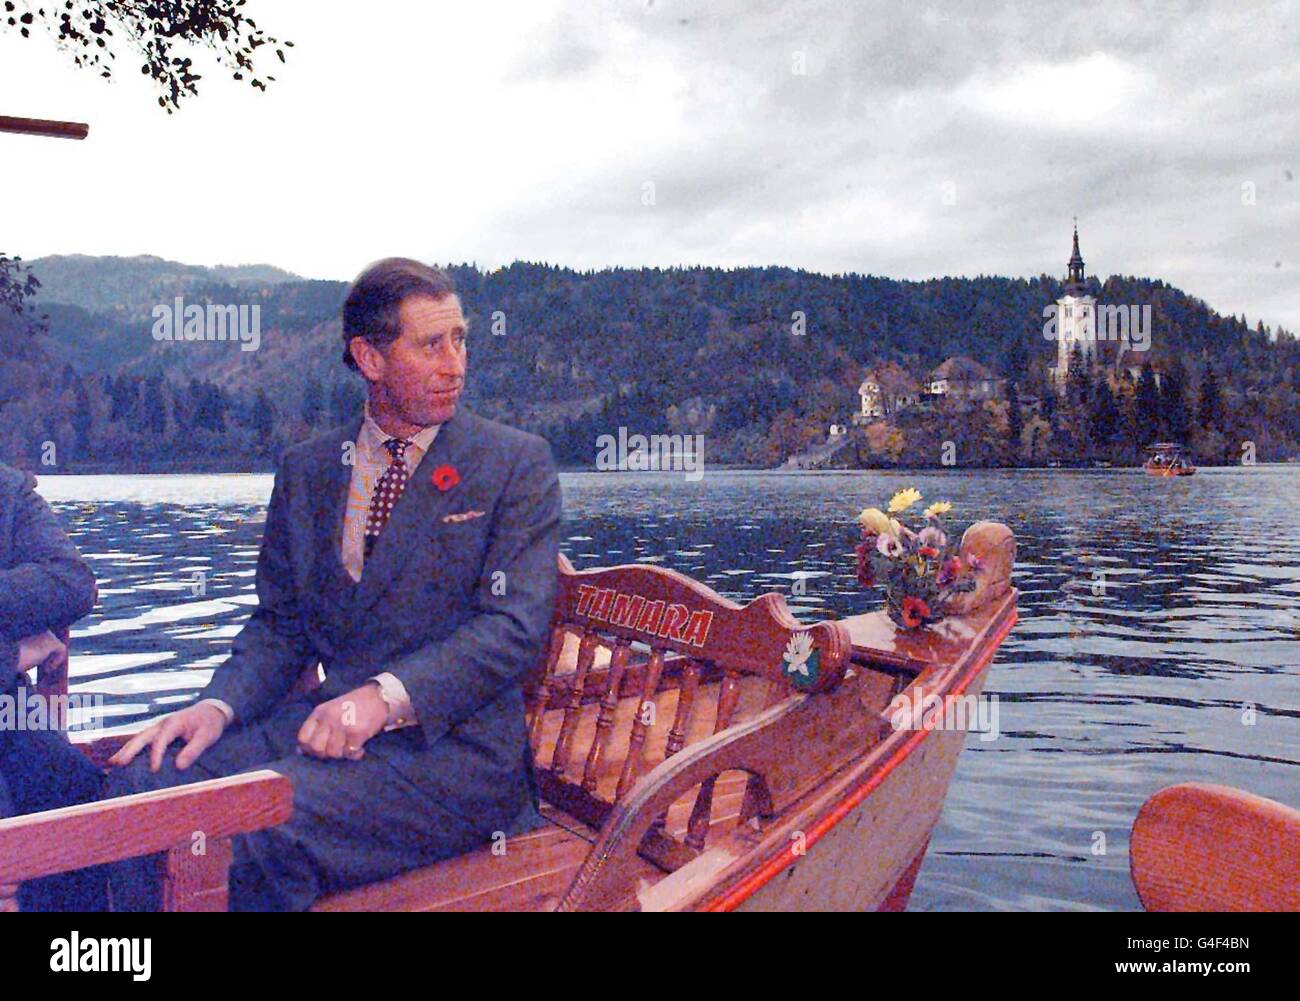 The Prince of Wales admires the view of the Castle in the centre of Lake Bled, during a rowing boat crossing to see the beauty spot in Slovenia Monday November 2, 1998. PA photo: John Stillwell. See PA story ROYAL Prince **EDI** Stock Photo